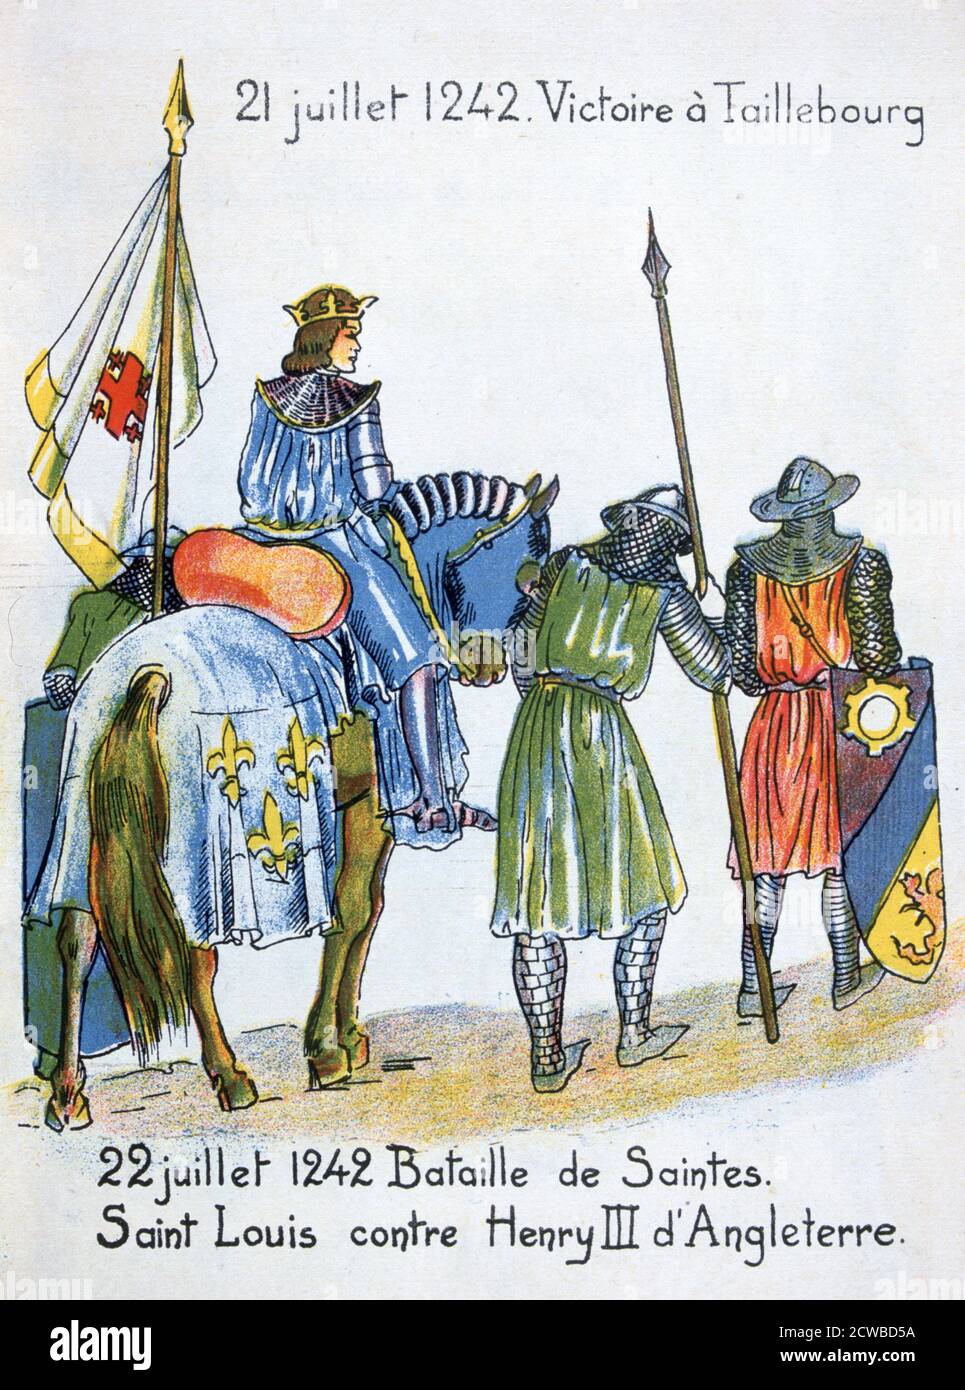 Battles of Taillebourg and Saintes, France, 21 and 22 July 1242, (20th century). Louis IX of France defeated Henry III at Taillebourg, and was again victorious over the English under the command of Hugh de Lusignan at Saintes. The two battles are known as the Saintonge War. From an anti-British brochure titled Who has been the enemy of France through History? The artist is unknown. Stock Photo